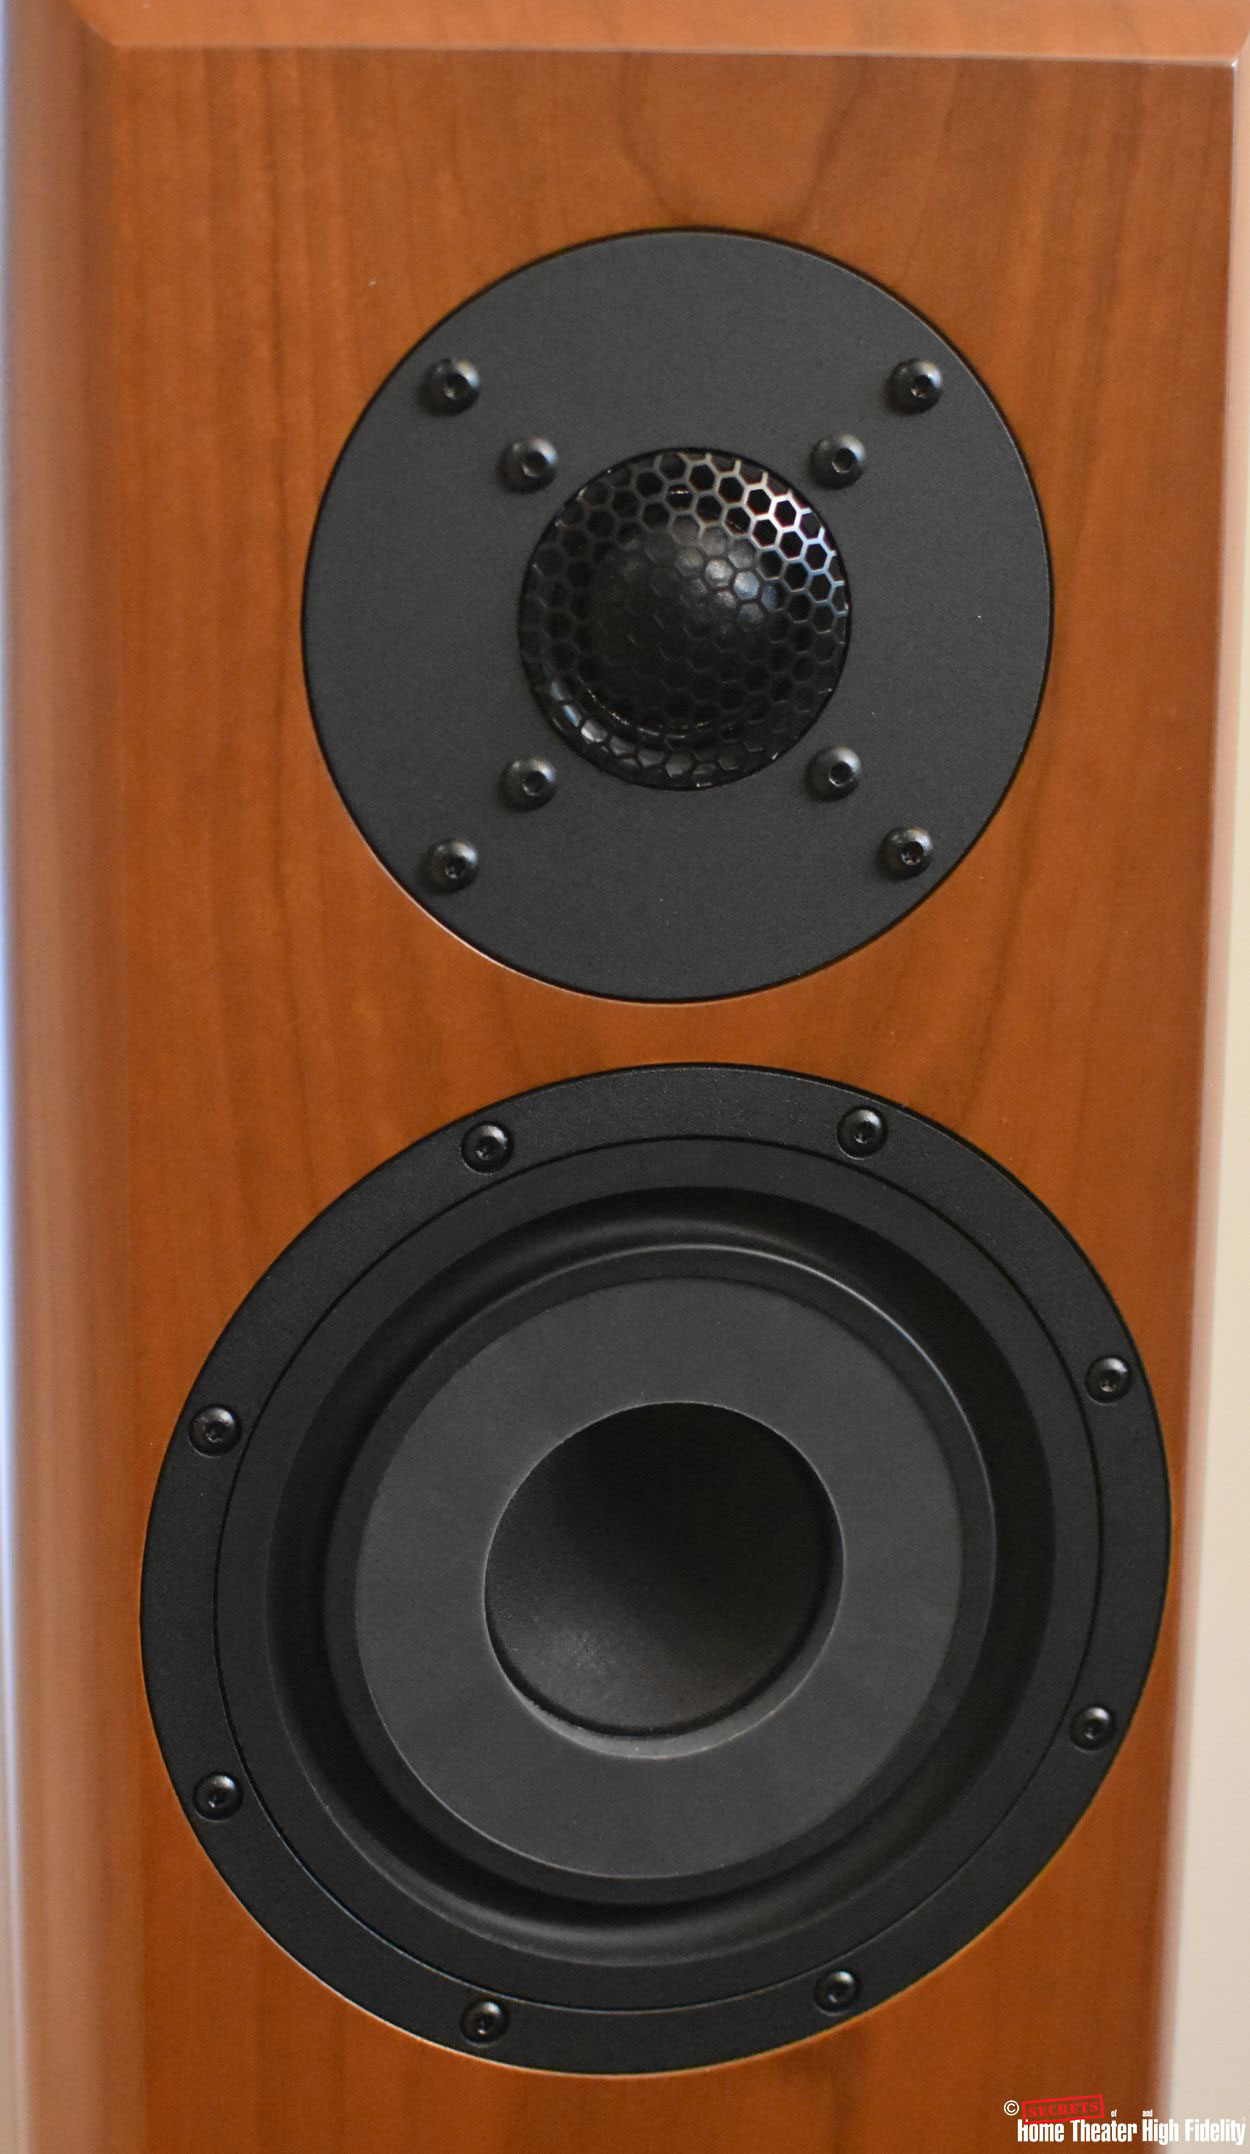 Vienna Acoustics Beethoven Baby Grand Reference tweeter and midrange drivers